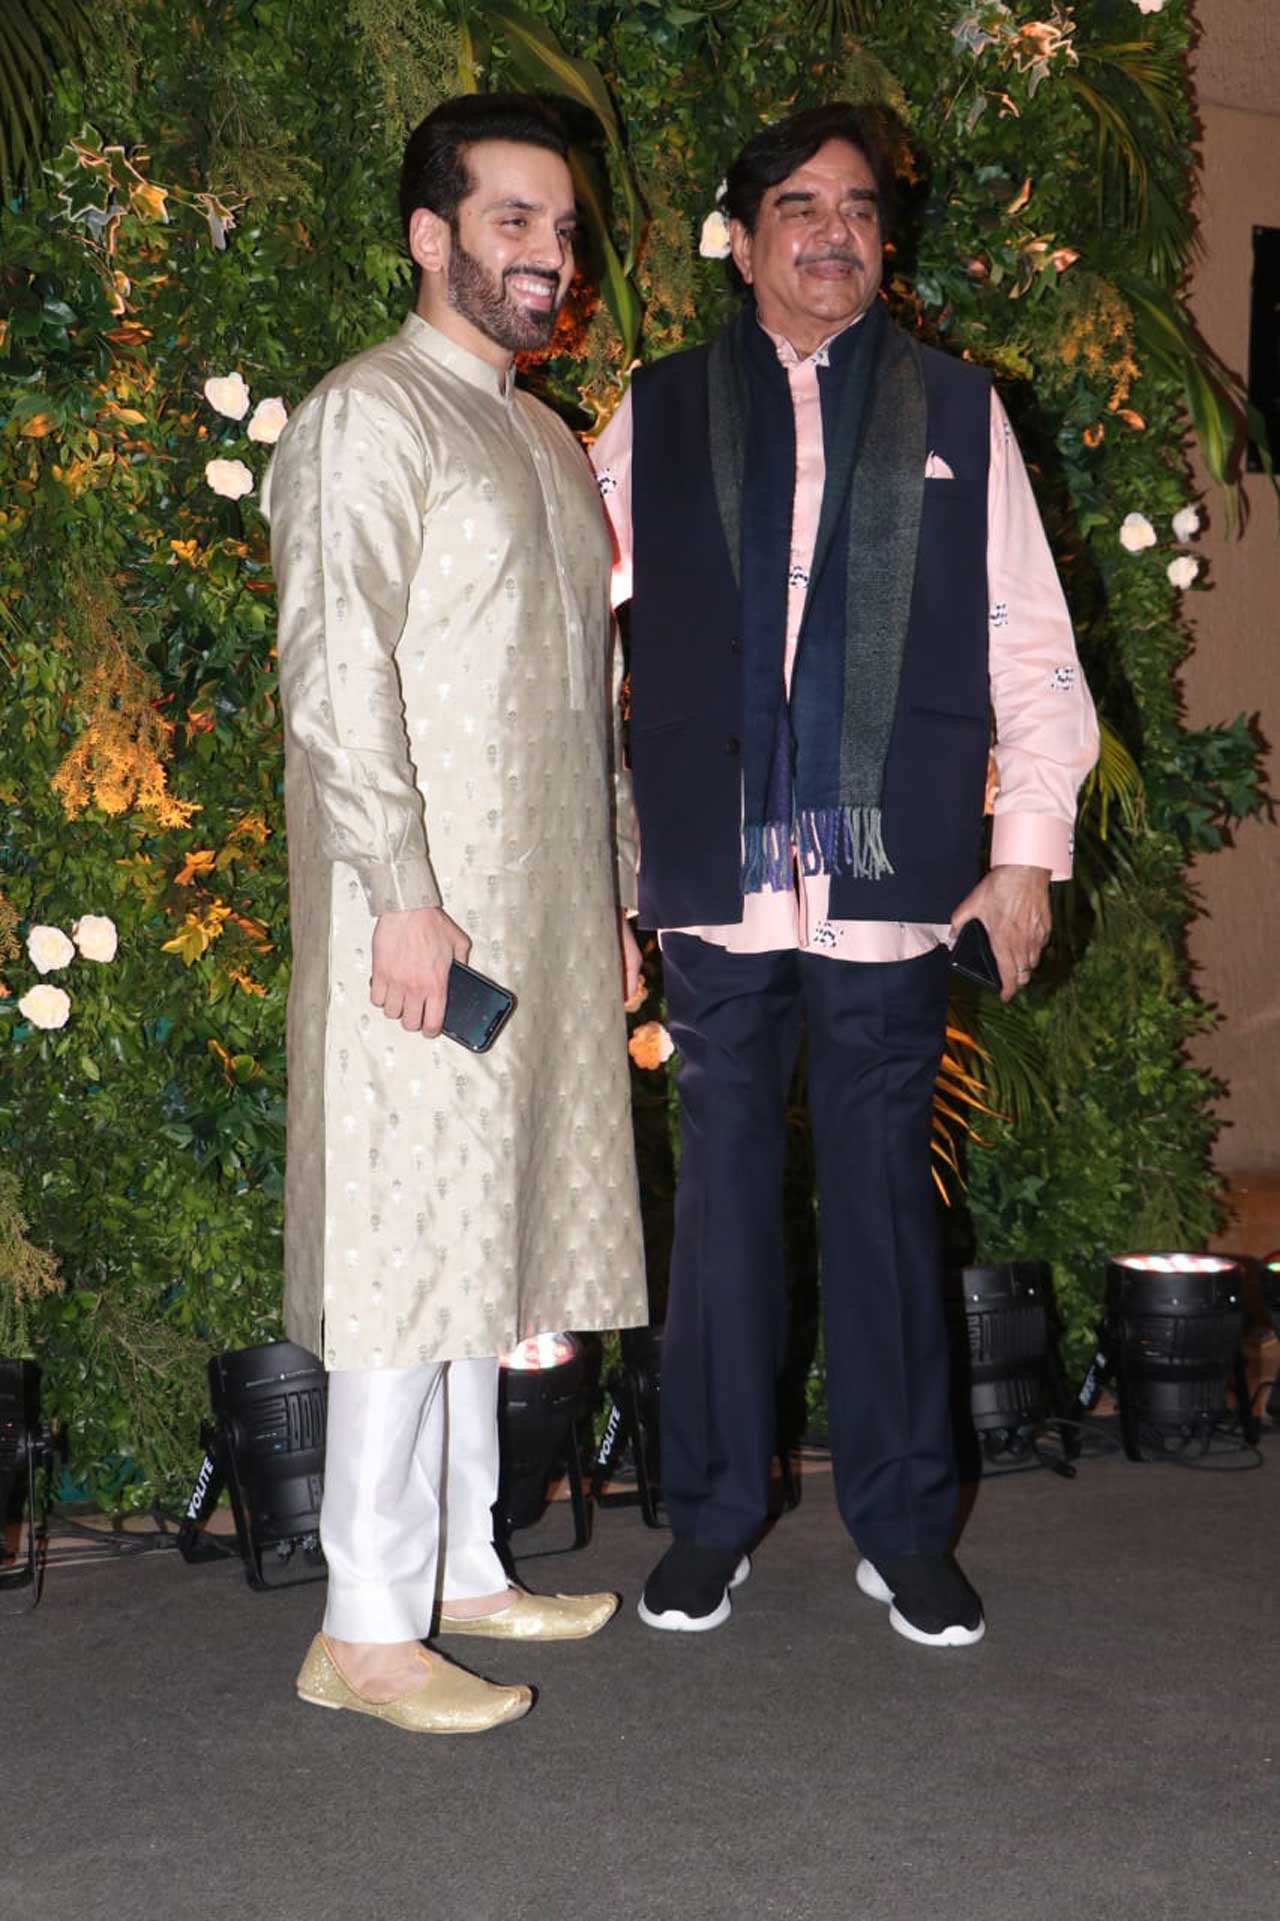 Shatrughan Sinha arrived with son Luv Sinha. The father-son duo posed for the cameras.